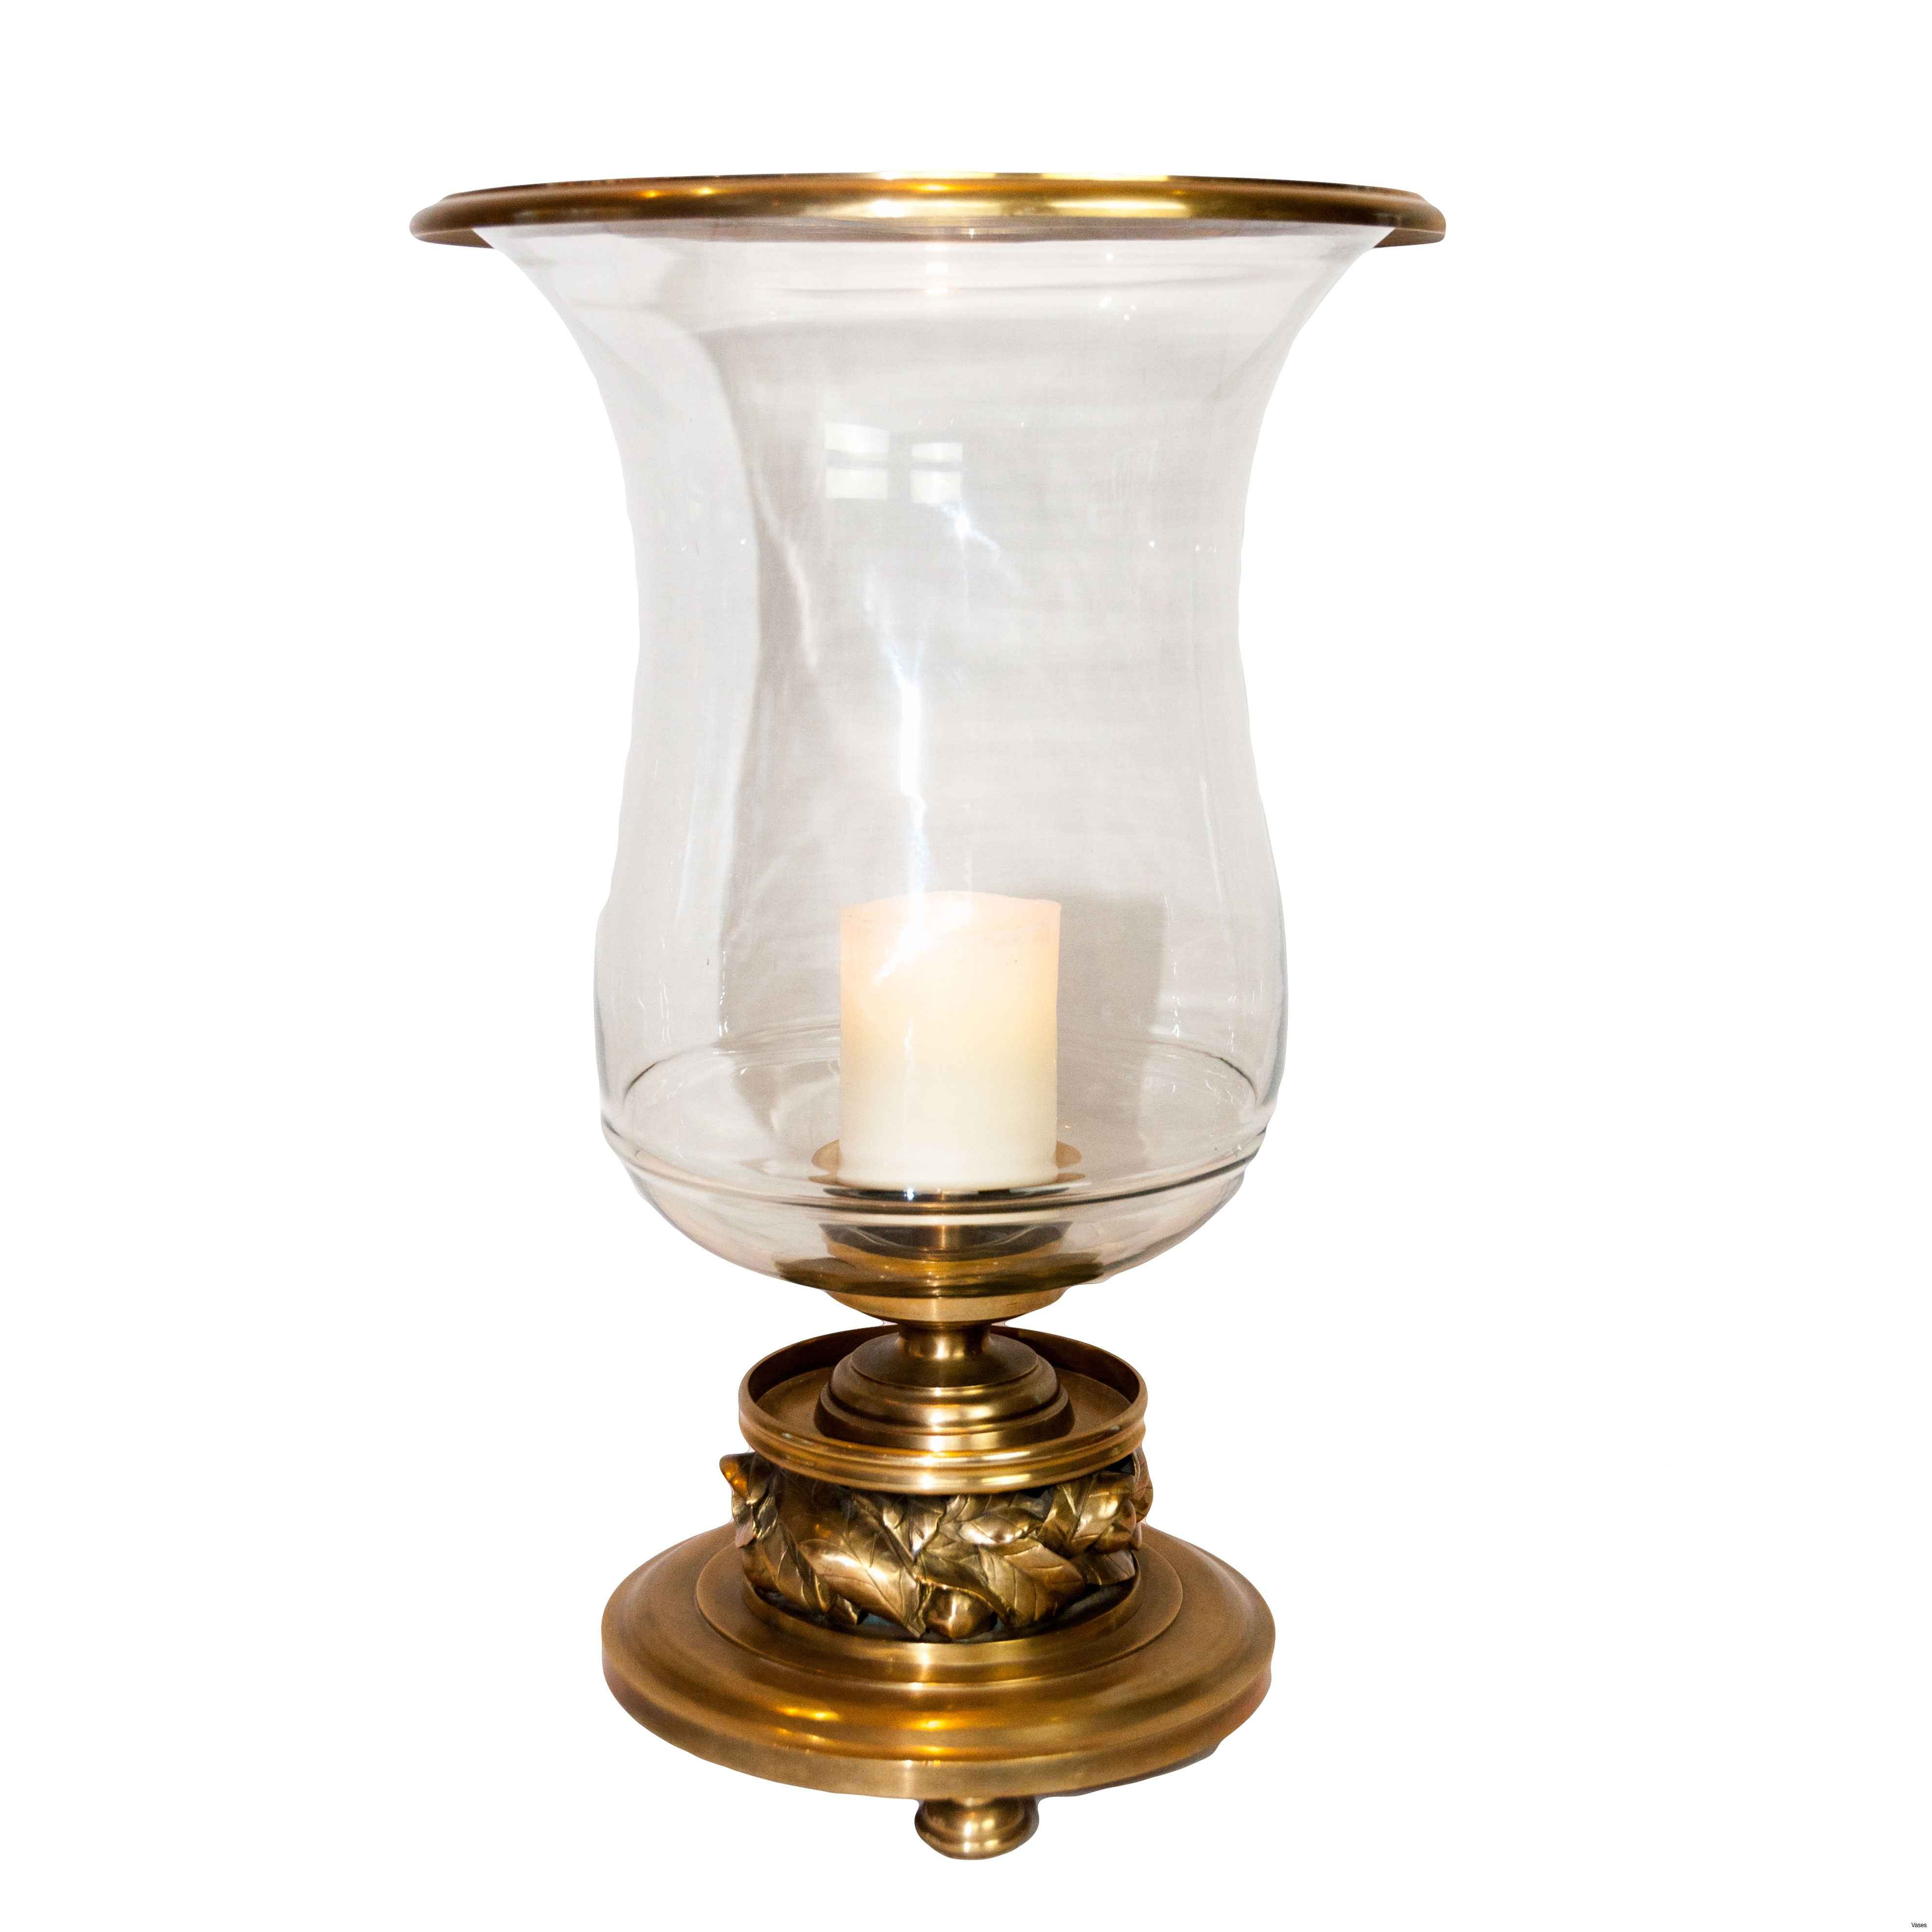 25 Awesome Pedestal Stands for Vases 2022 free download pedestal stands for vases of candle stands wholesale fresh candle holder wholesale glass votive in candle stands wholesale fresh candle holder wholesale glass votive candle holders beautiful